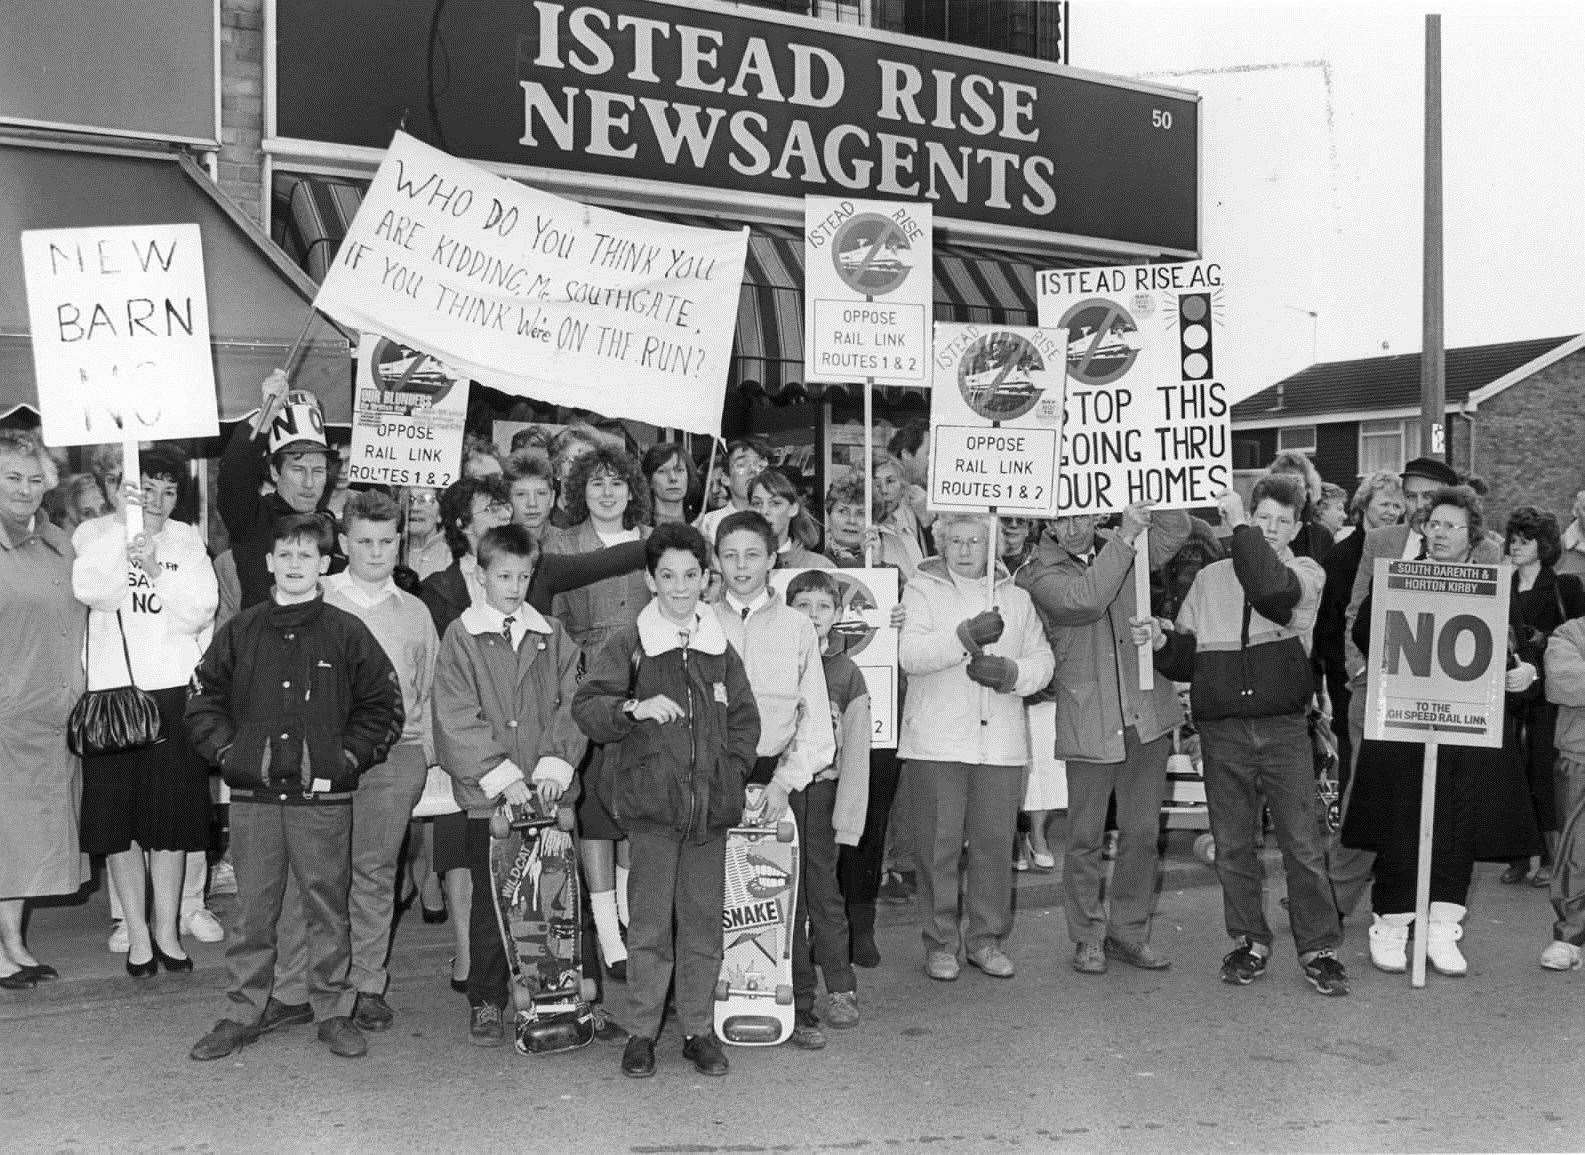 Protests at Istead Rise on March 15, 1989.